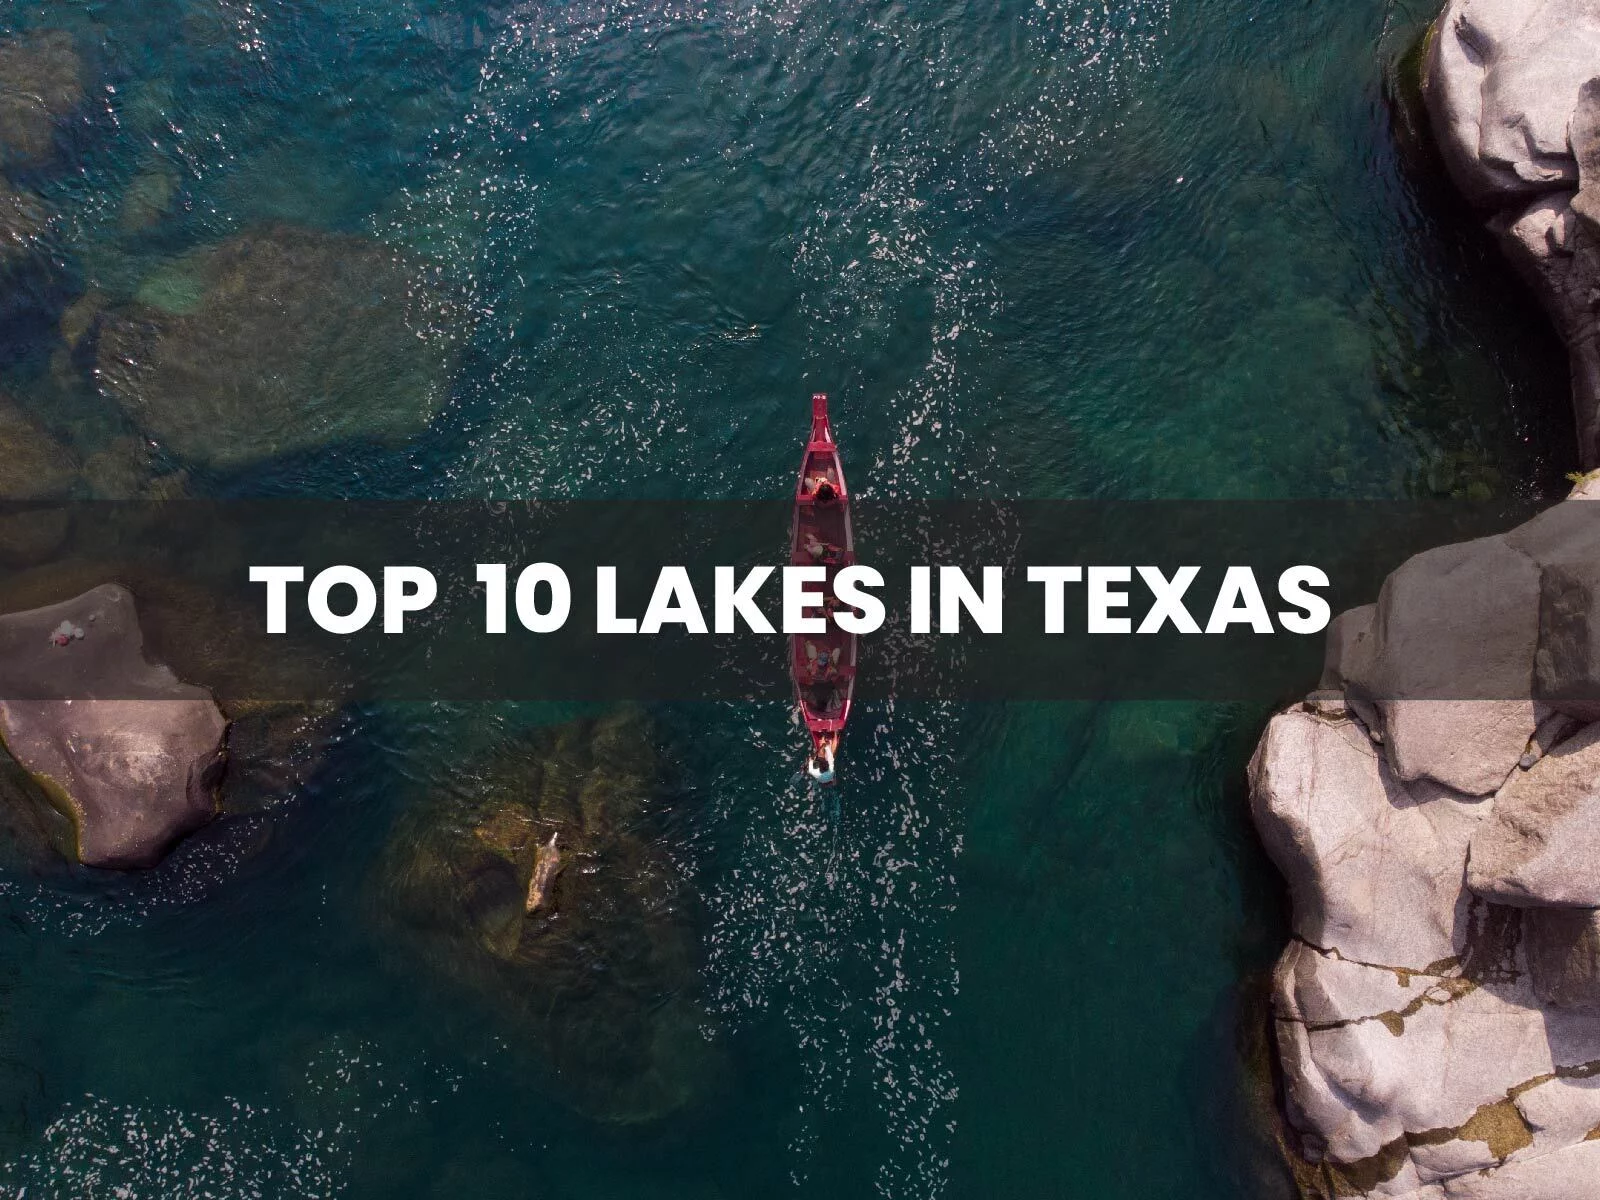 Top 10 Lakes in Texas